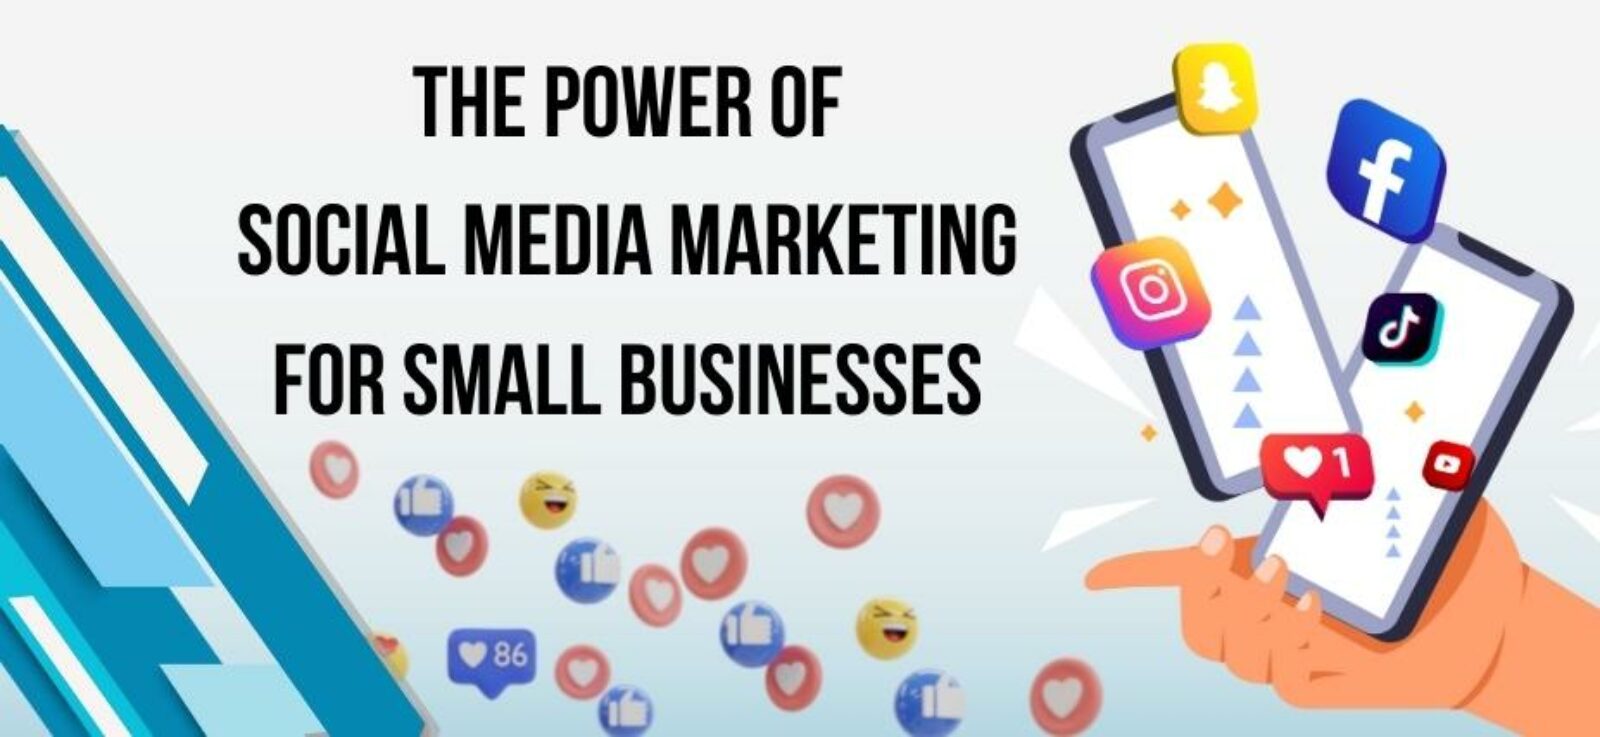 The Power of social media marketing for small businesses